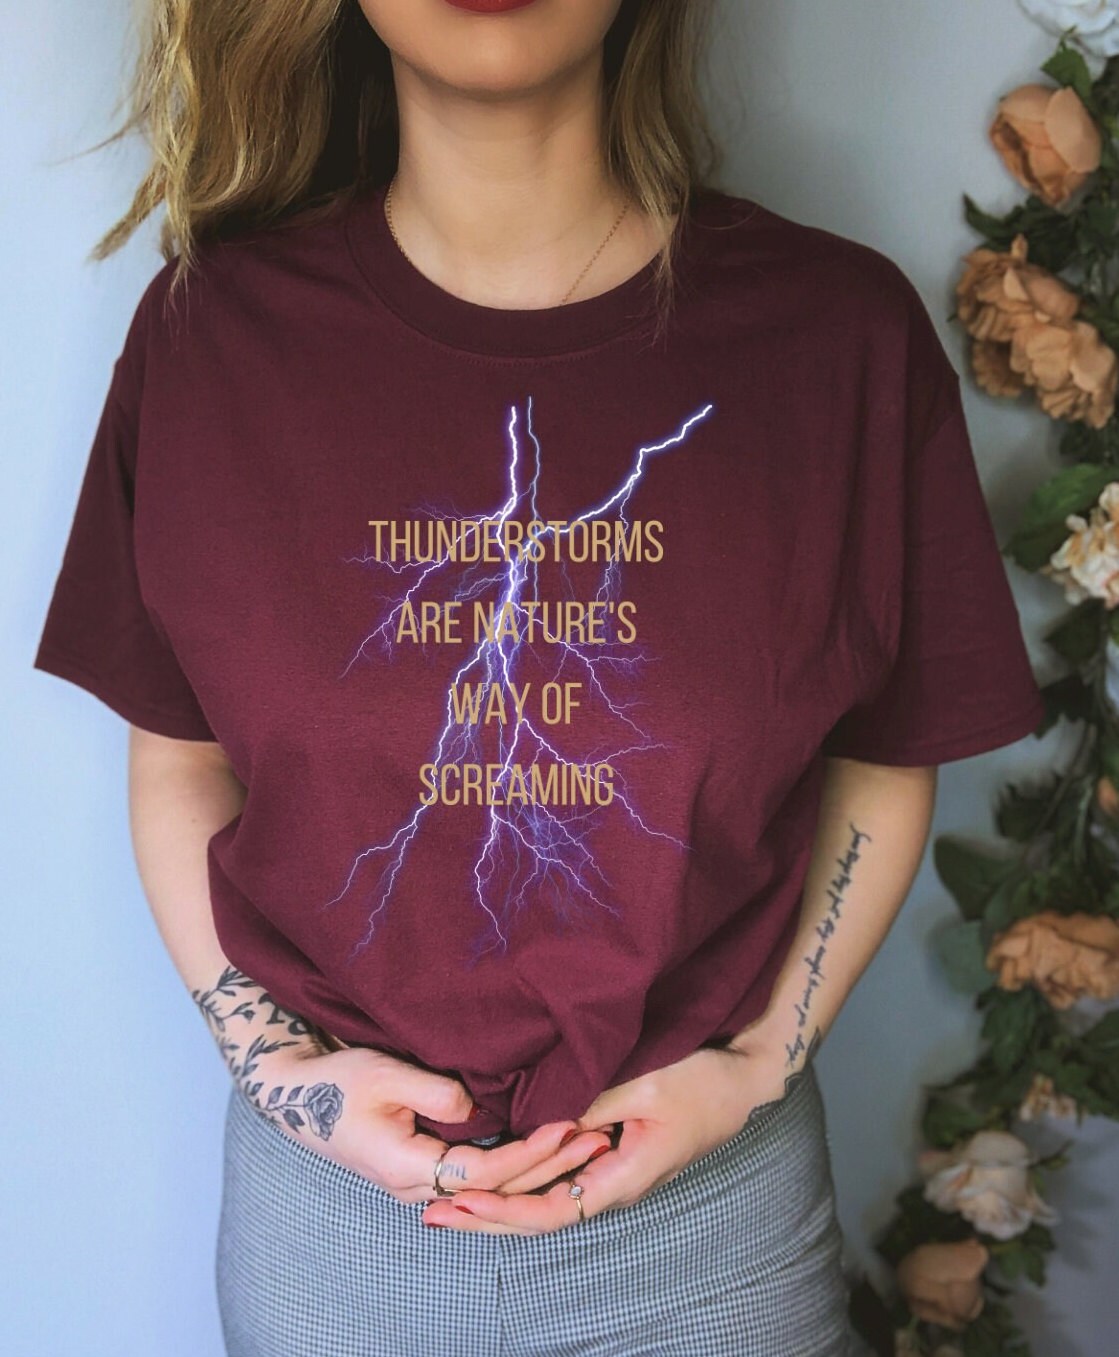 Violet Lightning Storm. , Where All The Street Stopping Style T-shirts Go!  Looking for A Funny T-Shirt, A Cool T-Shirt, A Crazy T-shirt?